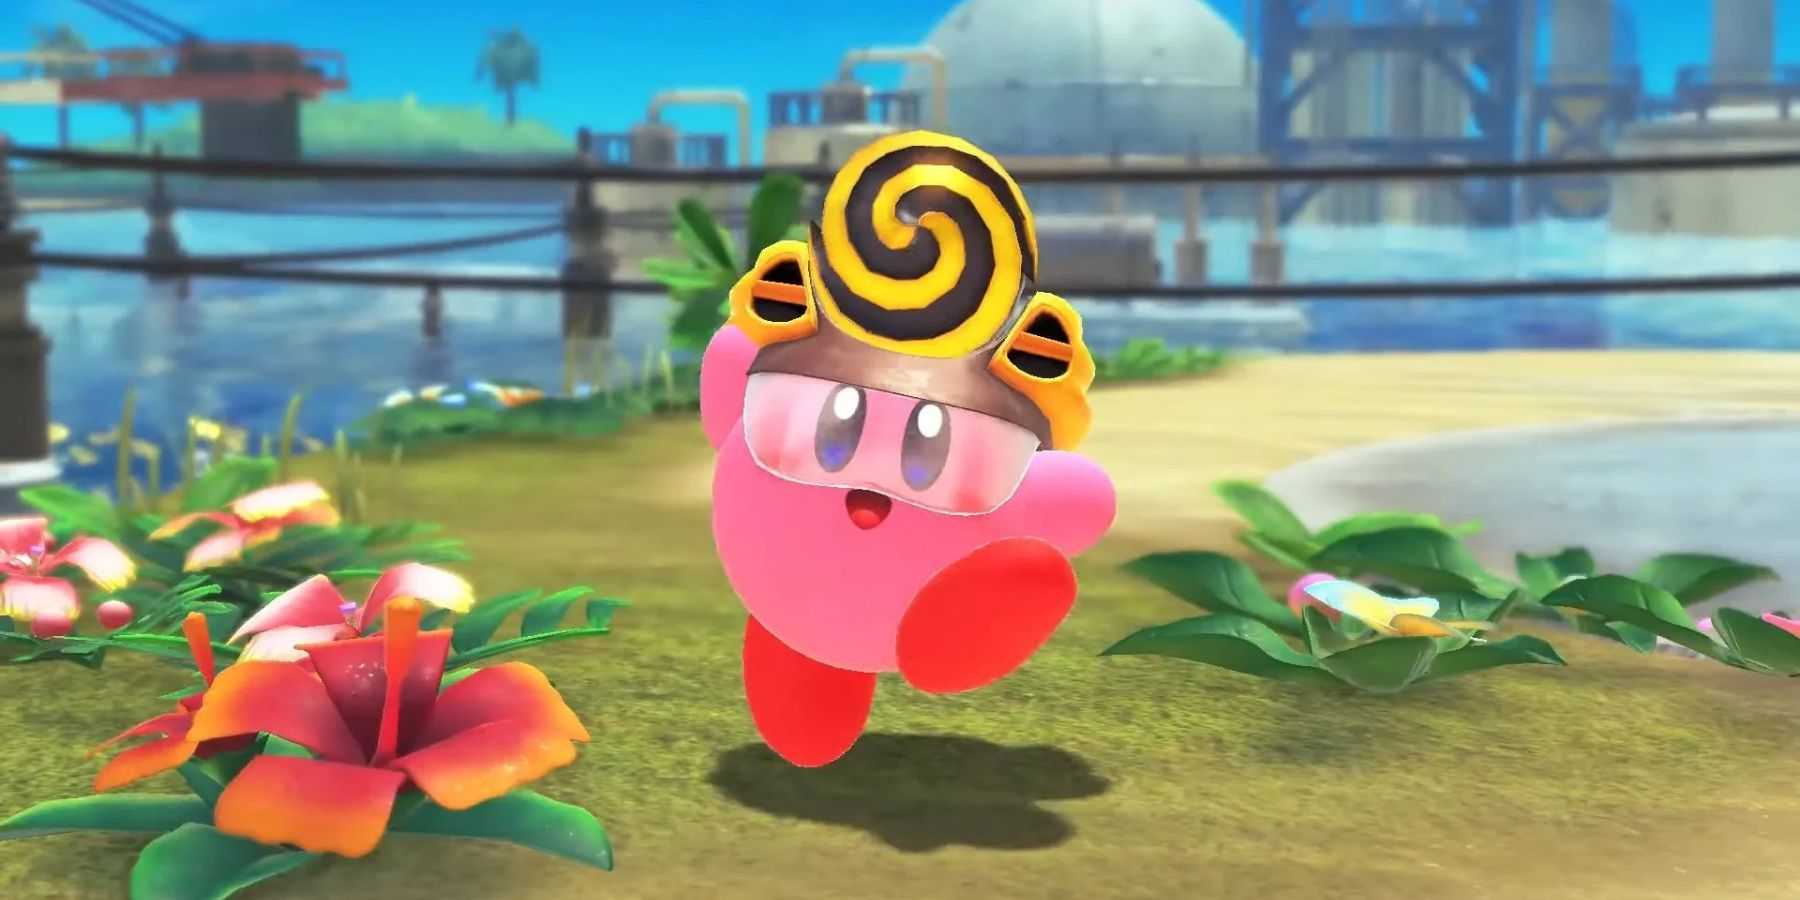 Kirby And The Forgotten Land Trailer Details Copy Abilities, Co-Op, March  Release Date Revealed - Game Informer